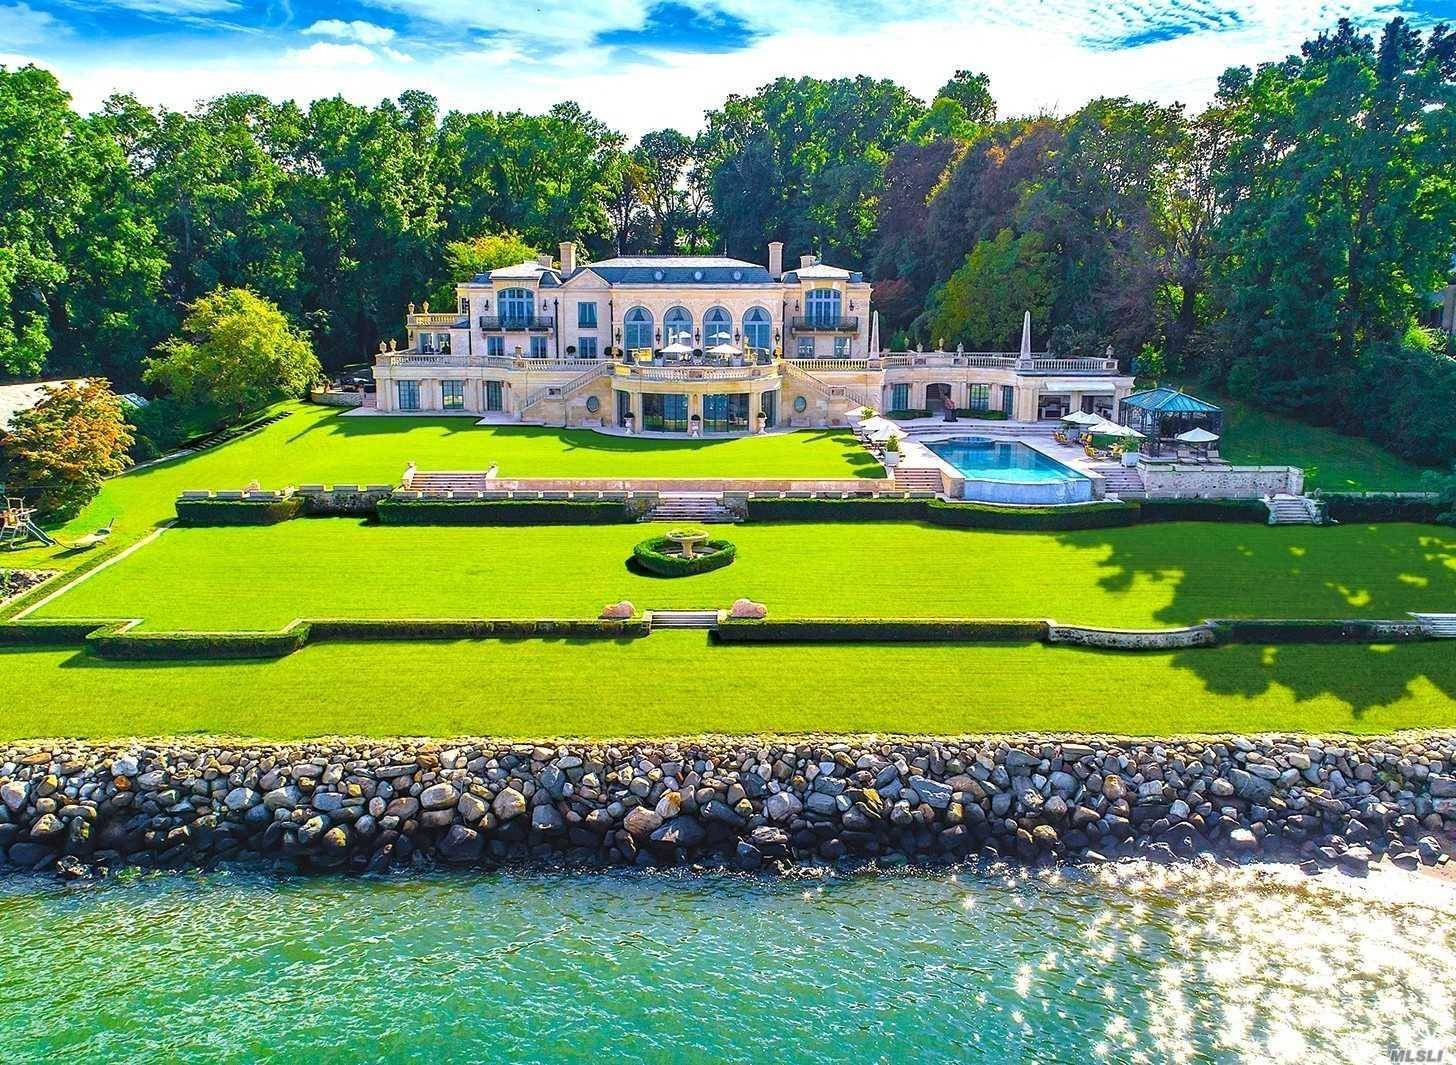 A Stunning Integration Of An Authentic Versailles And Modern Living Situated On 3 Acres Of Picturesque Waterfront Property In The Prestigious Village Of Kings Point.